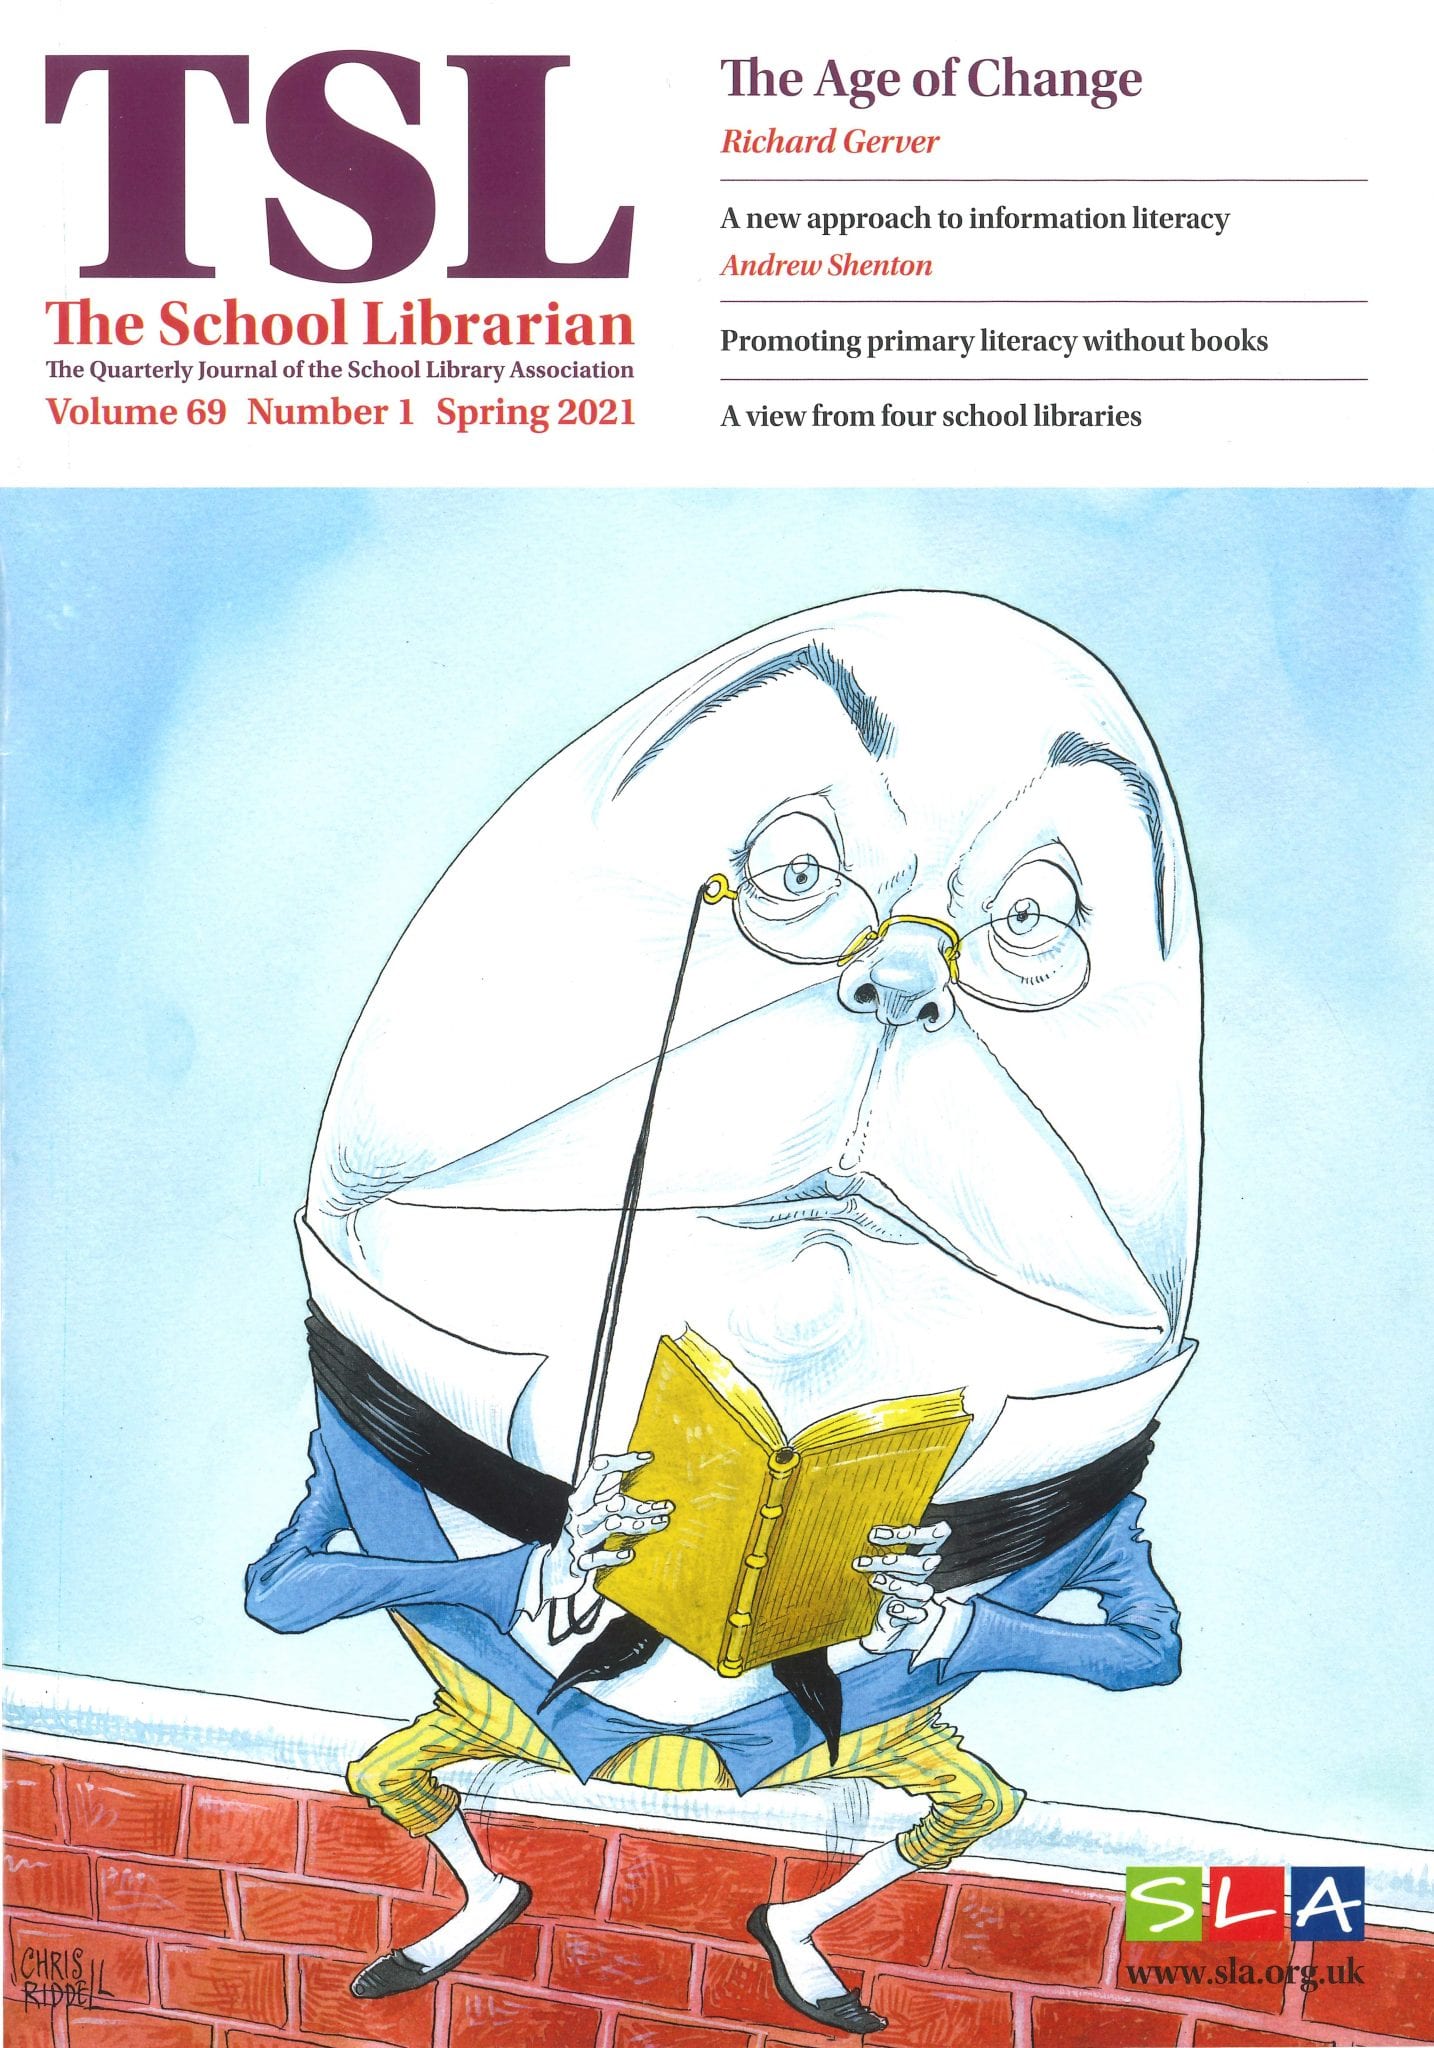 Article | The School Librarian Newsroom